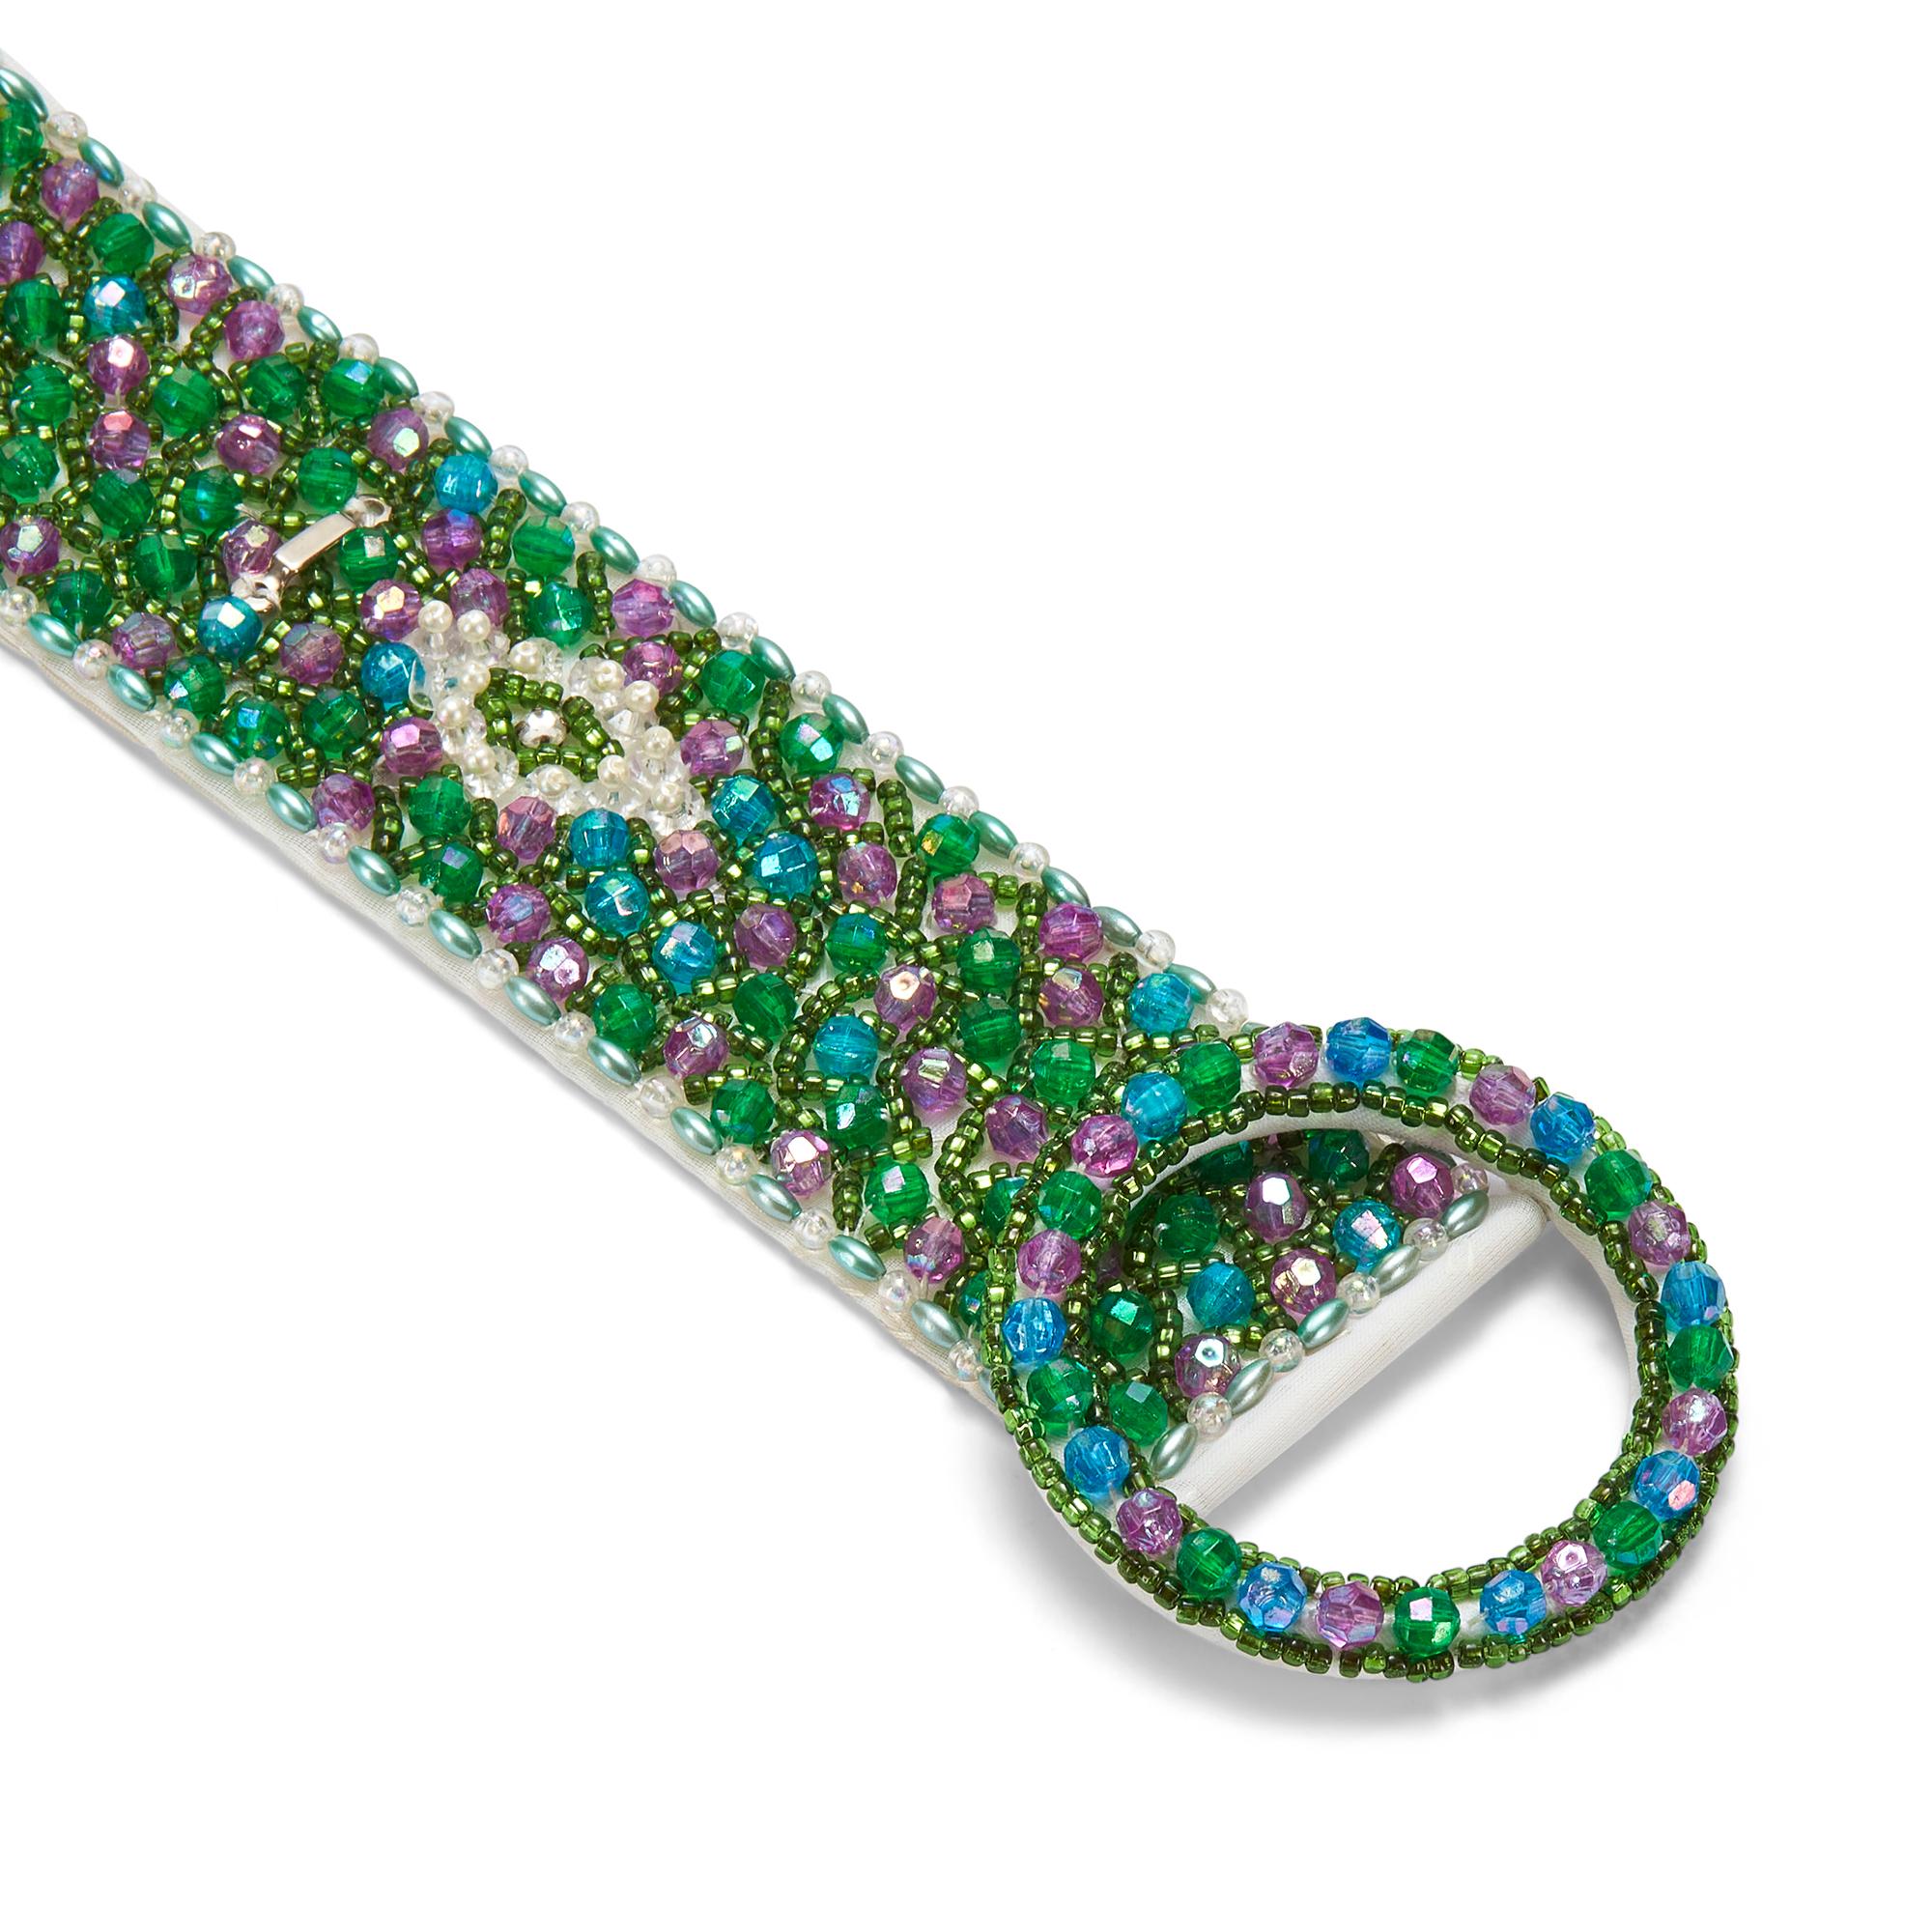 This lavish embellished cloth belt was made in the 1960s and remains in excellent vintage condition, without a bead out of place. It is covered all over with beads of varying sizes in lustrous blue, green and pink-purple. Tiny pearls and sheer,